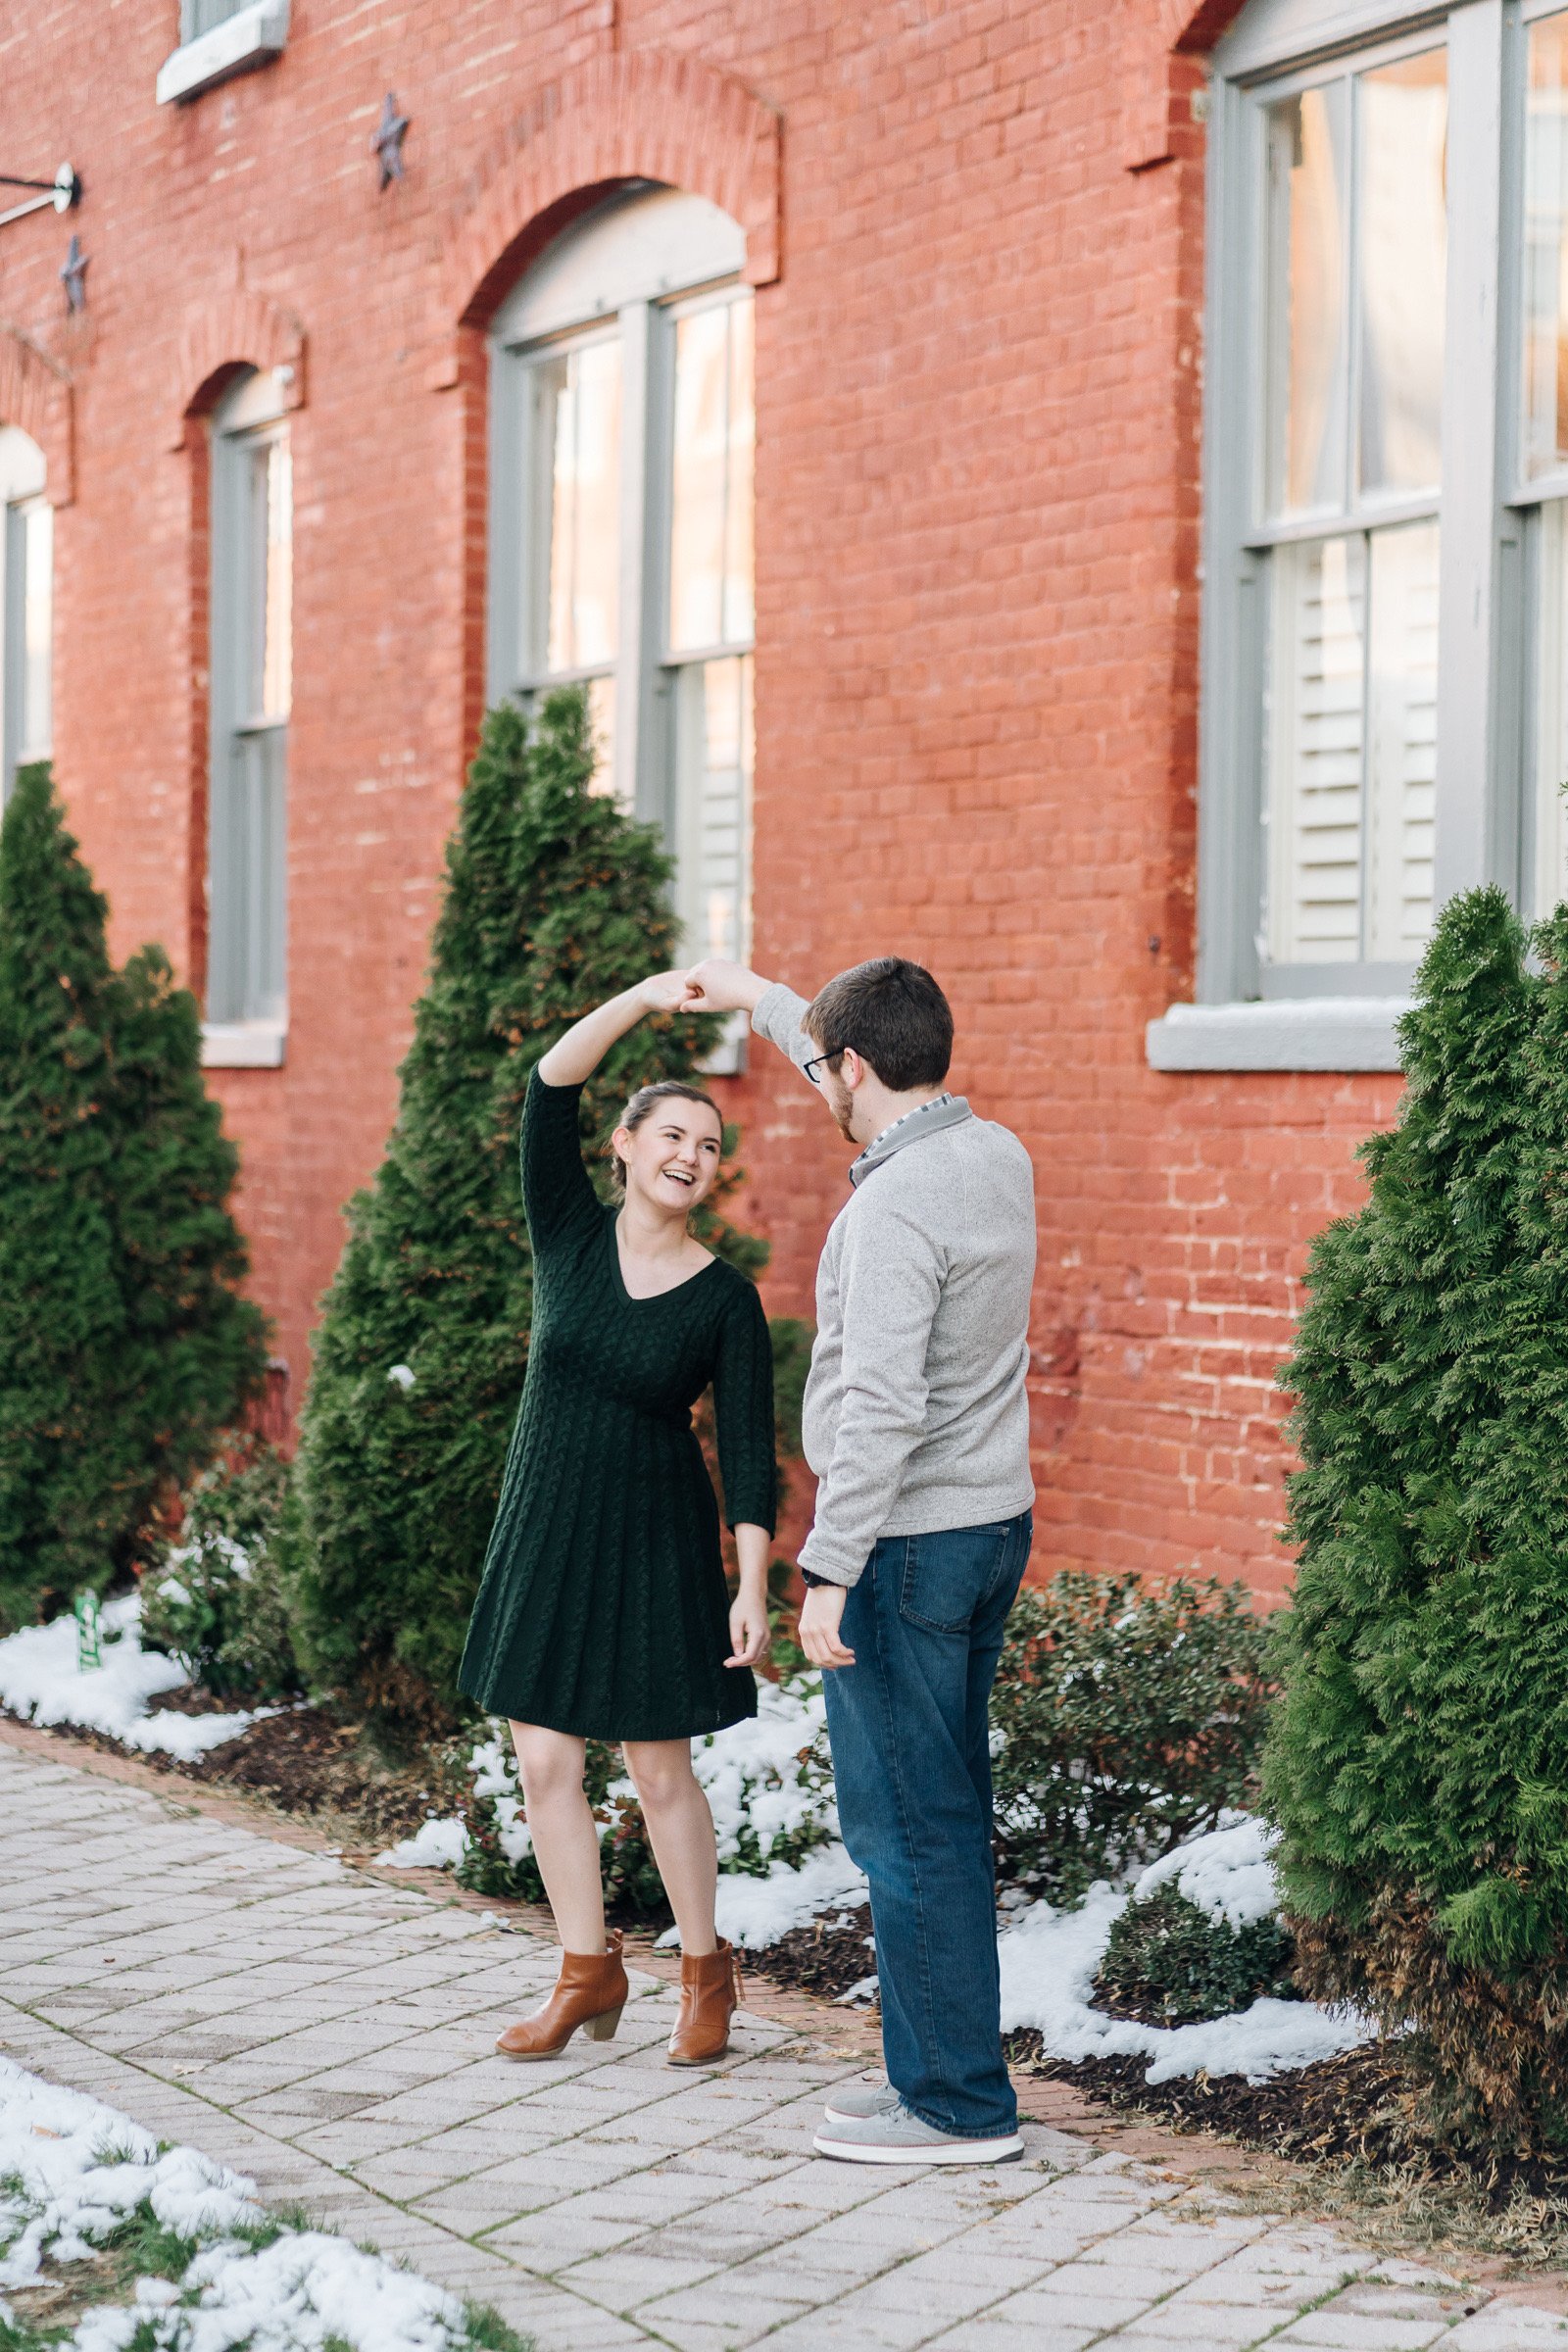 jameson-anna-engagement-session-downtown-danville-river-district-virginia-by-jonathan-hannah-photography-20.jpg